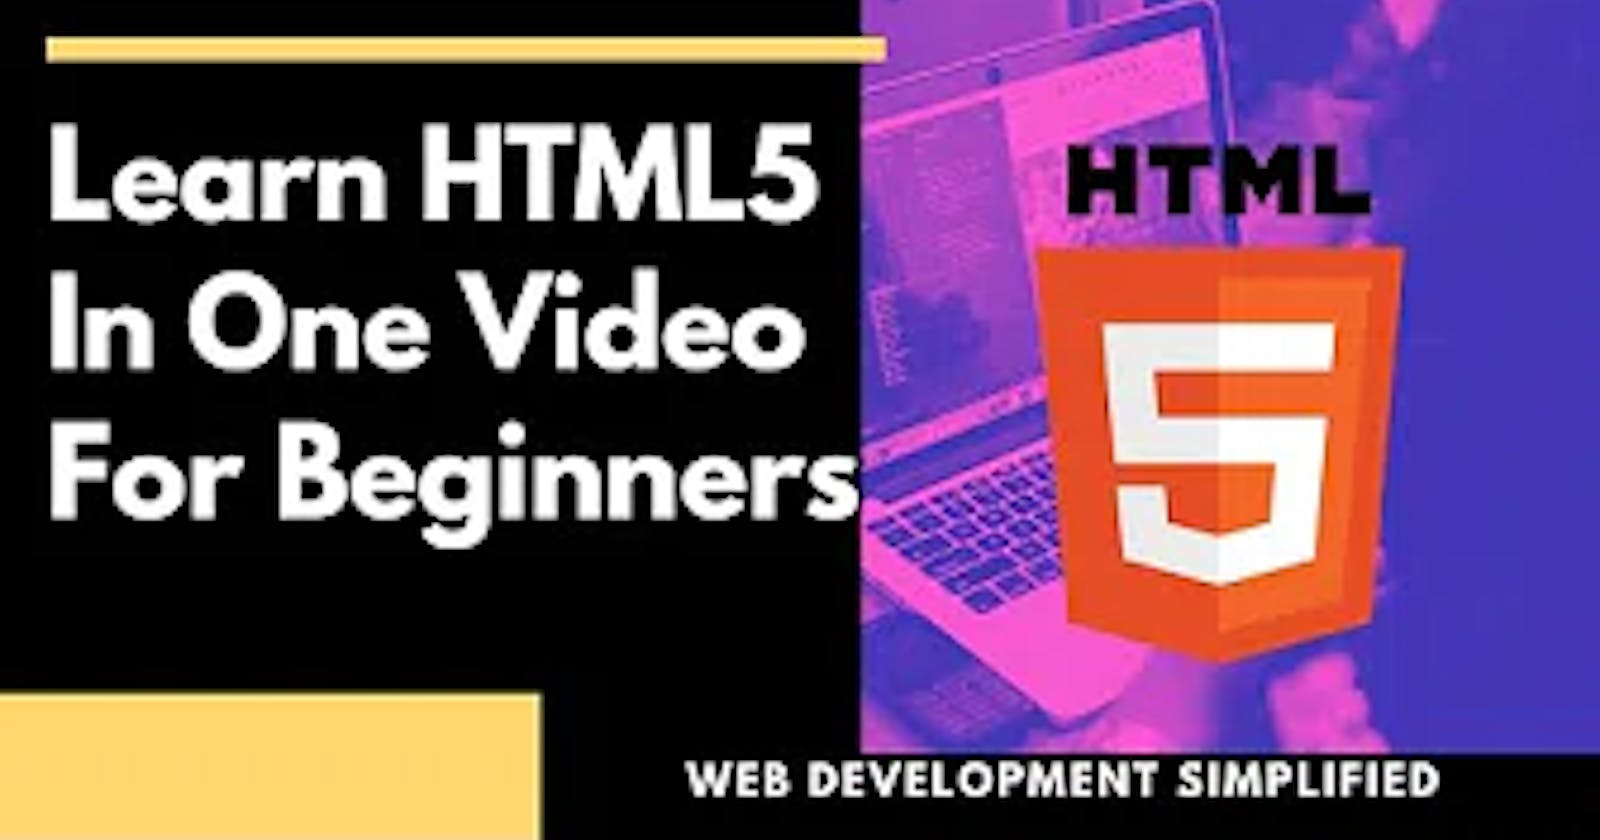 Learn HTML5 For Absolute Beginners In One Video